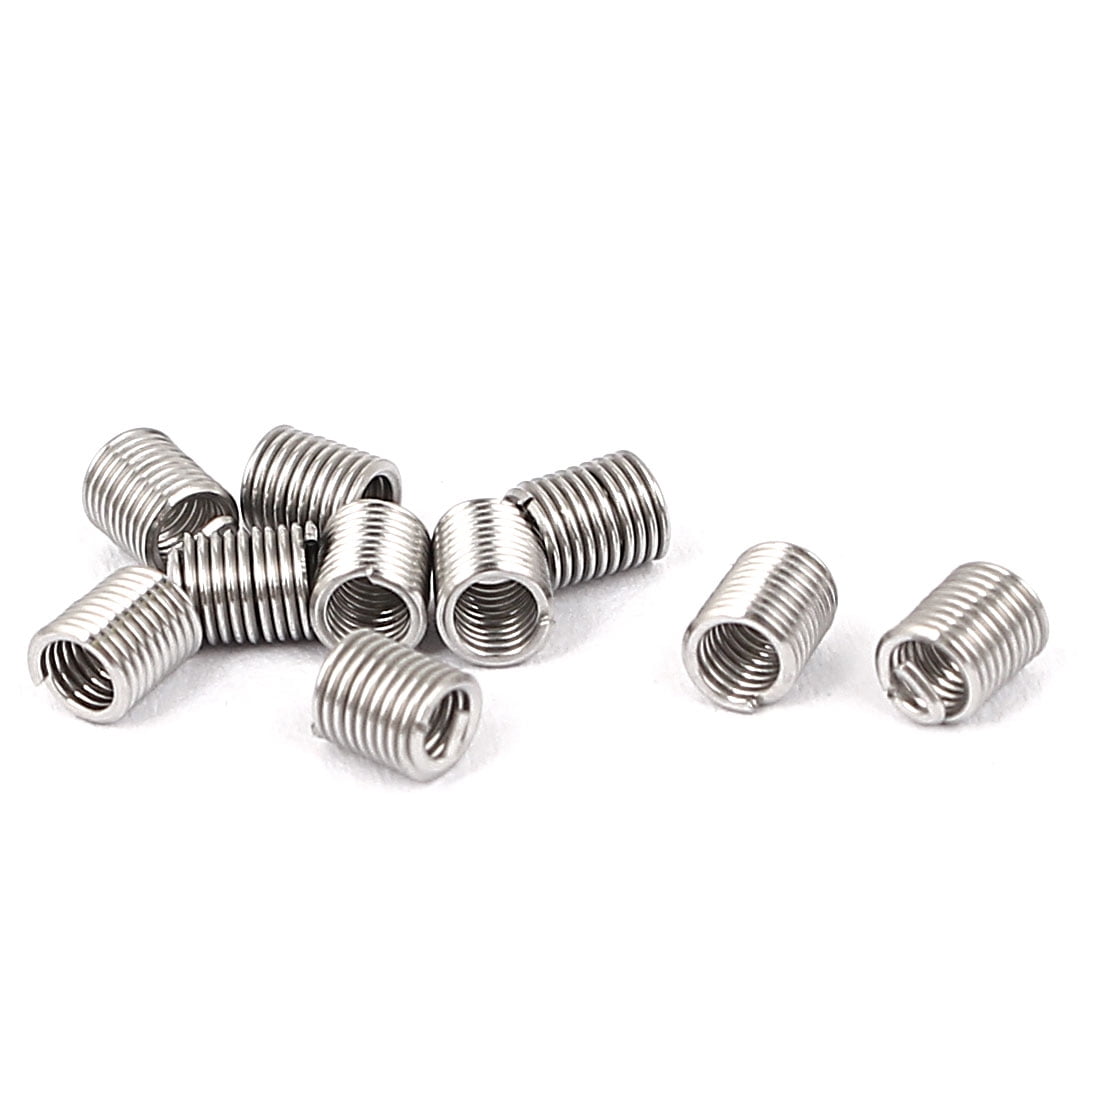 10 Off V-Coil Thread Repair Inserts 1/2 x 13 UNC Compatible With Helicoil 1.5D 